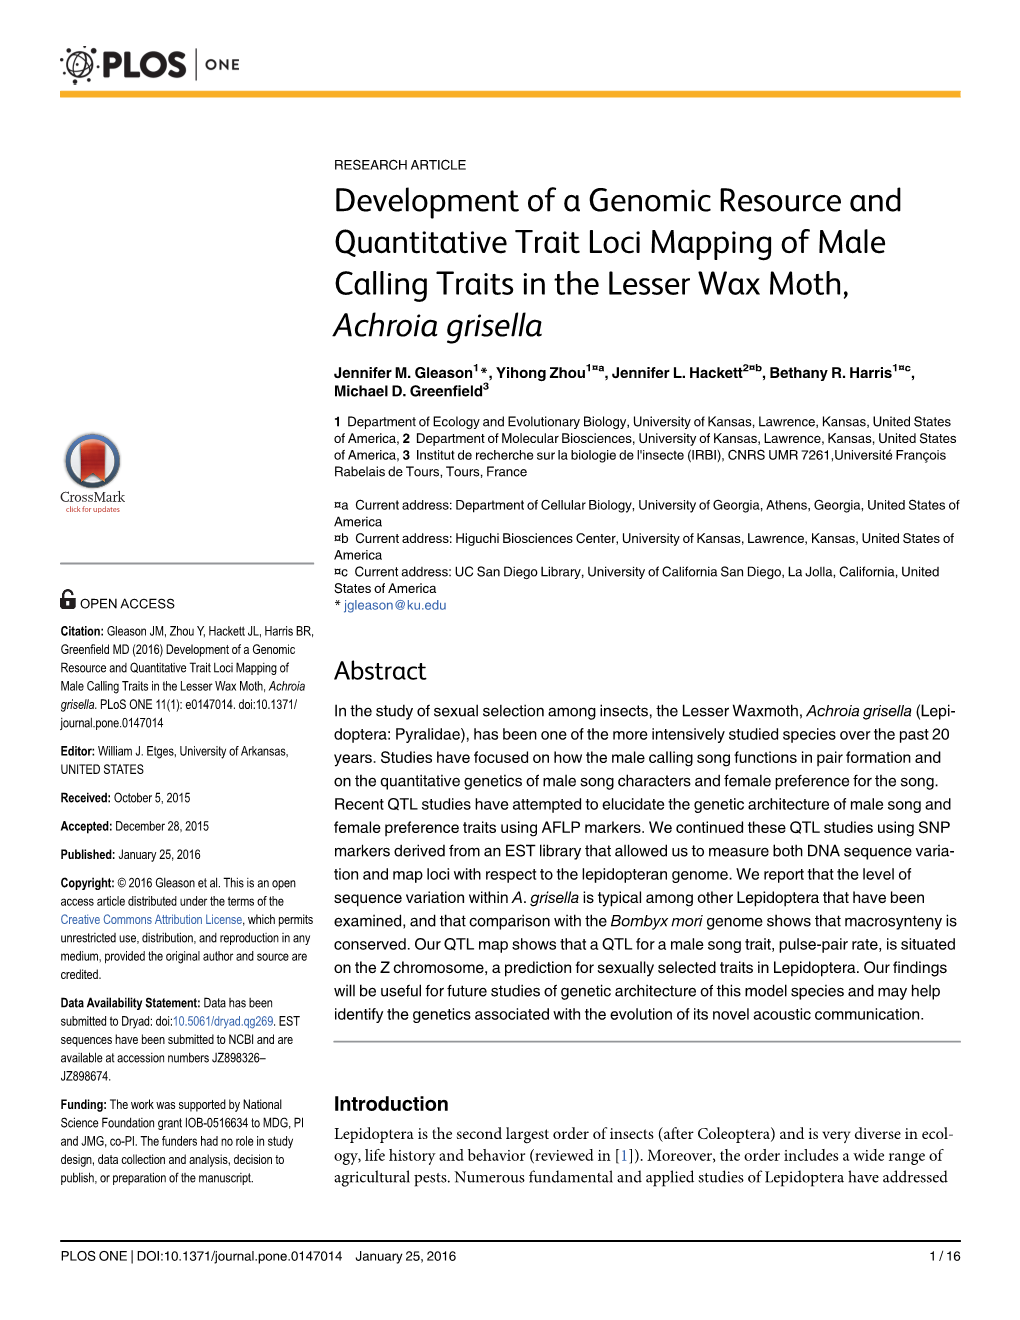 Development of a Genomic Resource and Quantitative Trait Loci Mapping of Male Calling Traits in the Lesser Wax Moth, Achroia Grisella